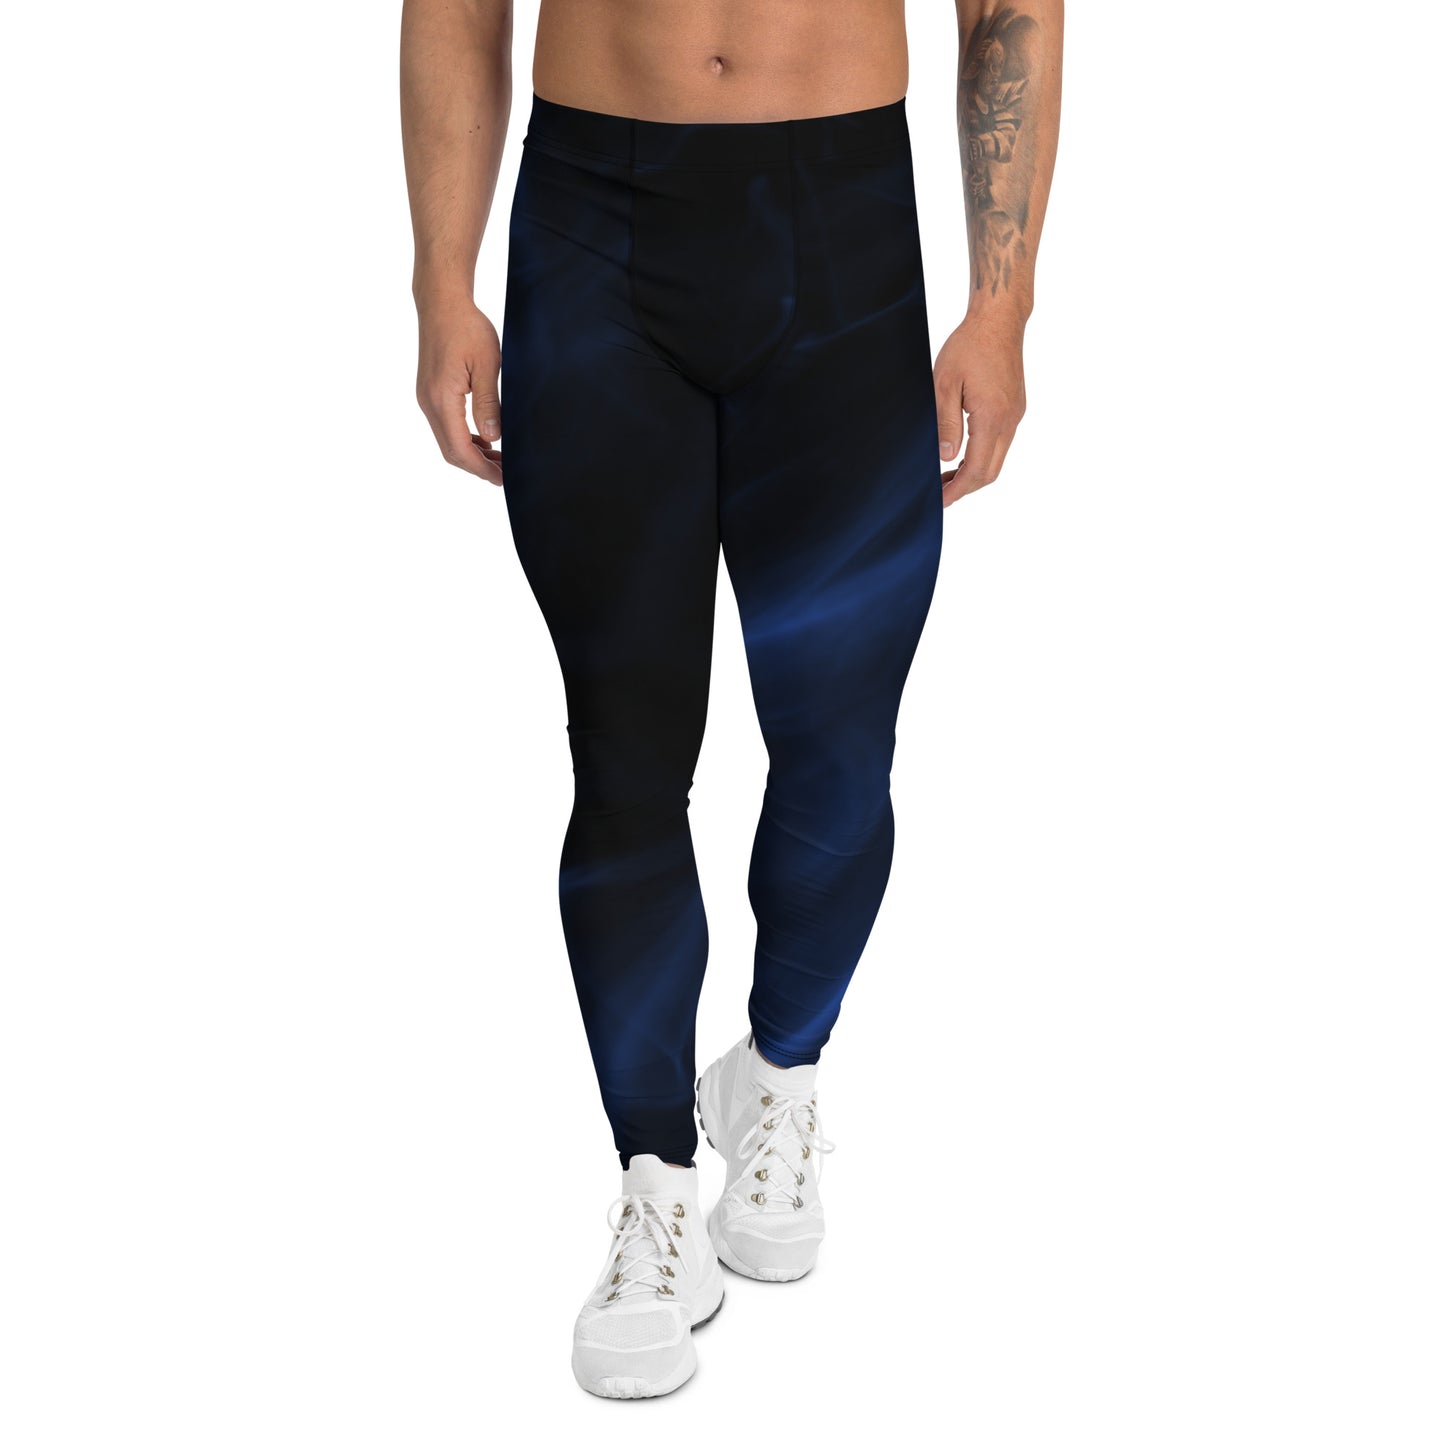 Men's long all-over print black and blue stretchy compression gym leggings